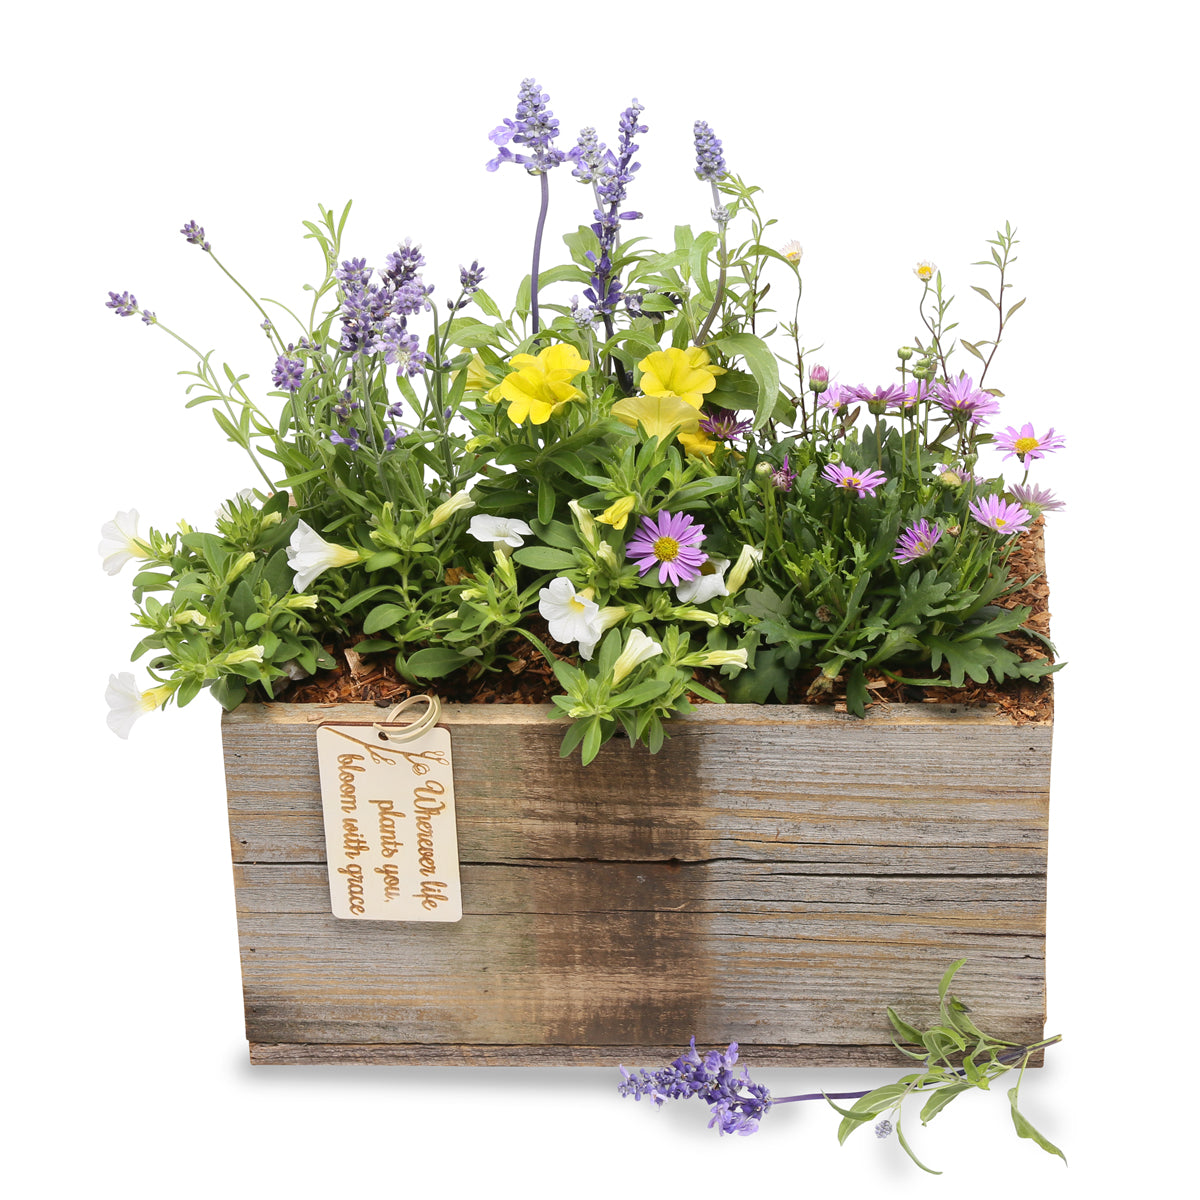 Welcome Bebe Gift Crate + Flowers in Easton, MA | The Wild Dahlia at 56 Main